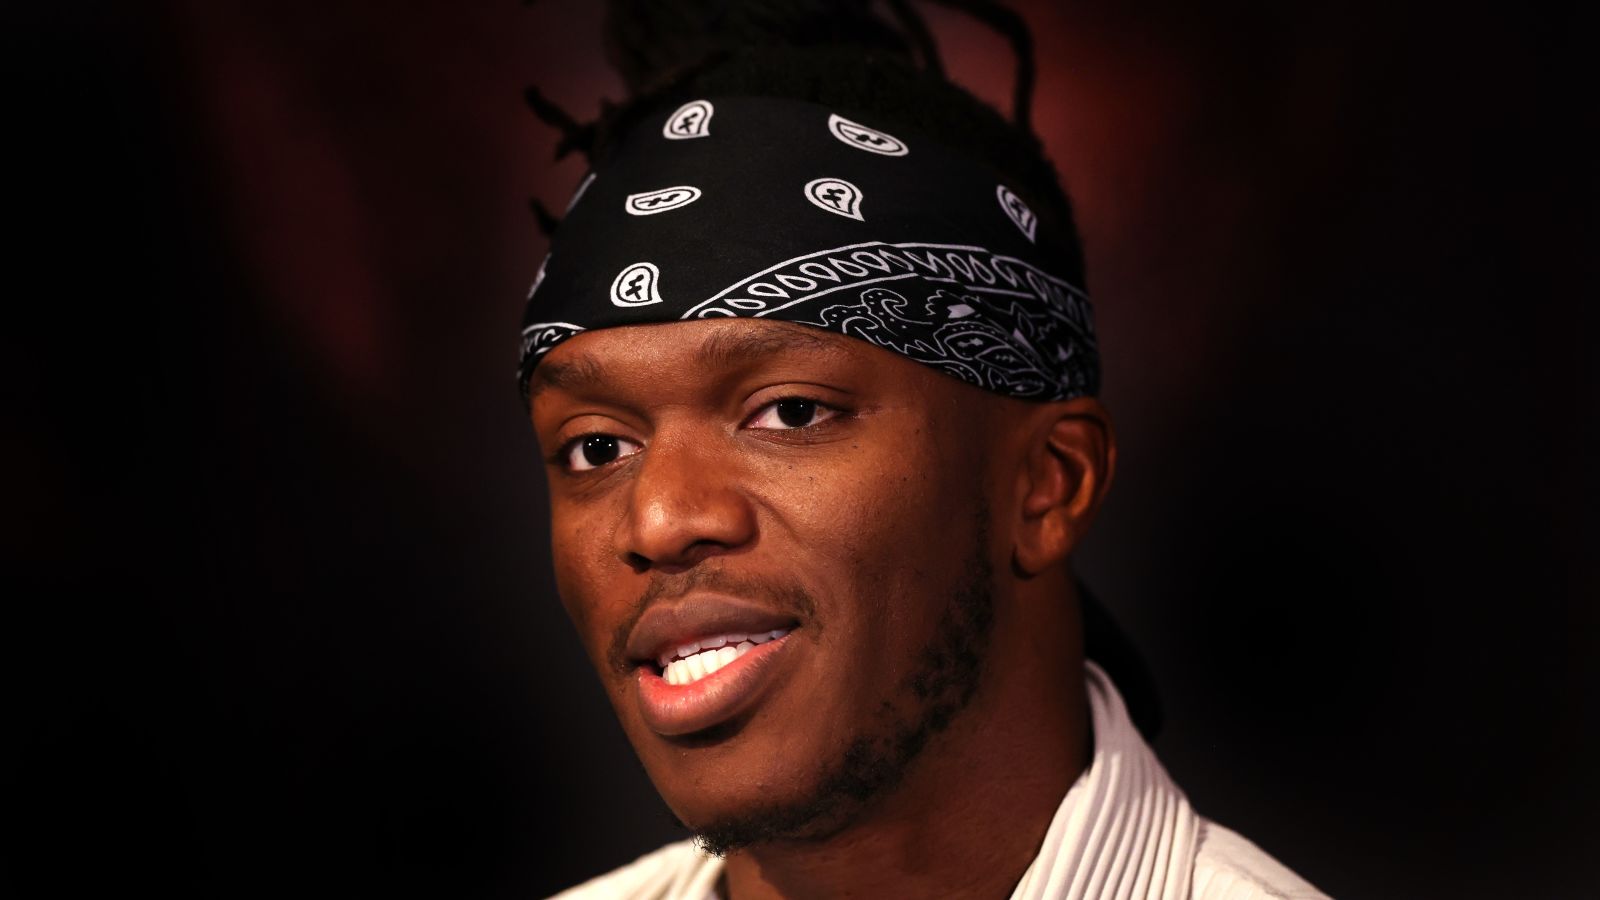 Potrait Image of KSI wearing a black bandanna with white designs